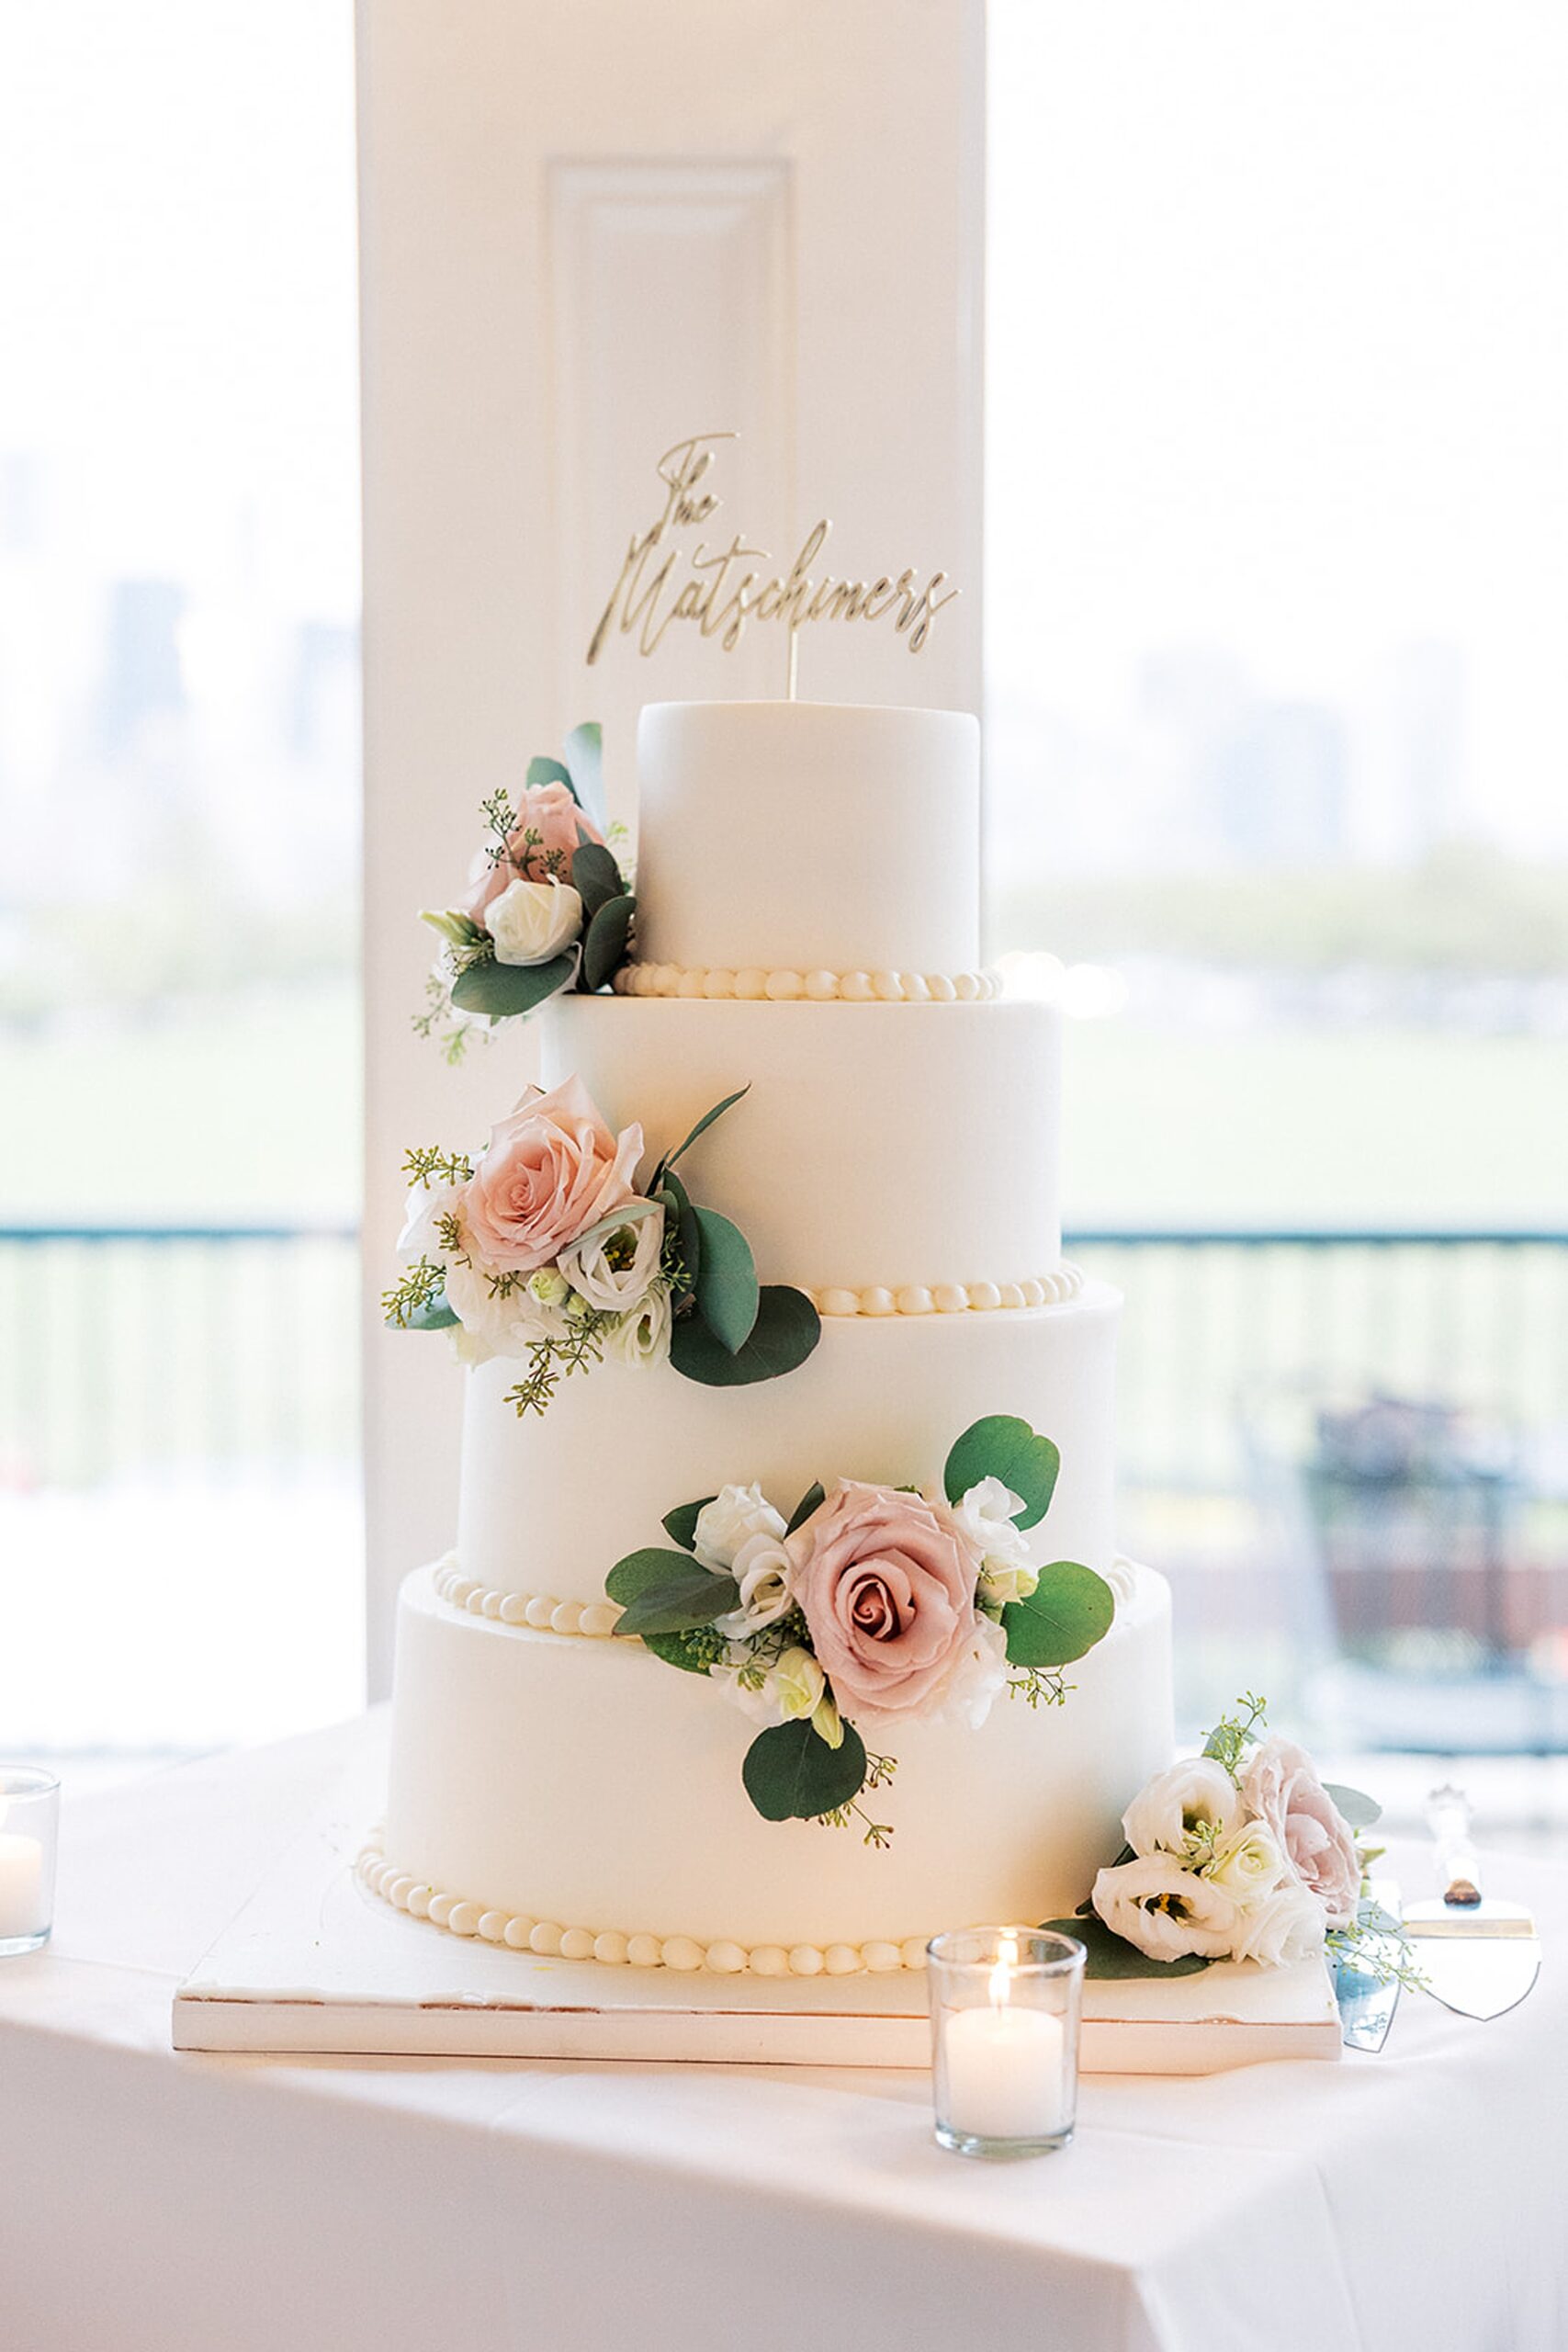 Details of a four tier cake with pink flowers